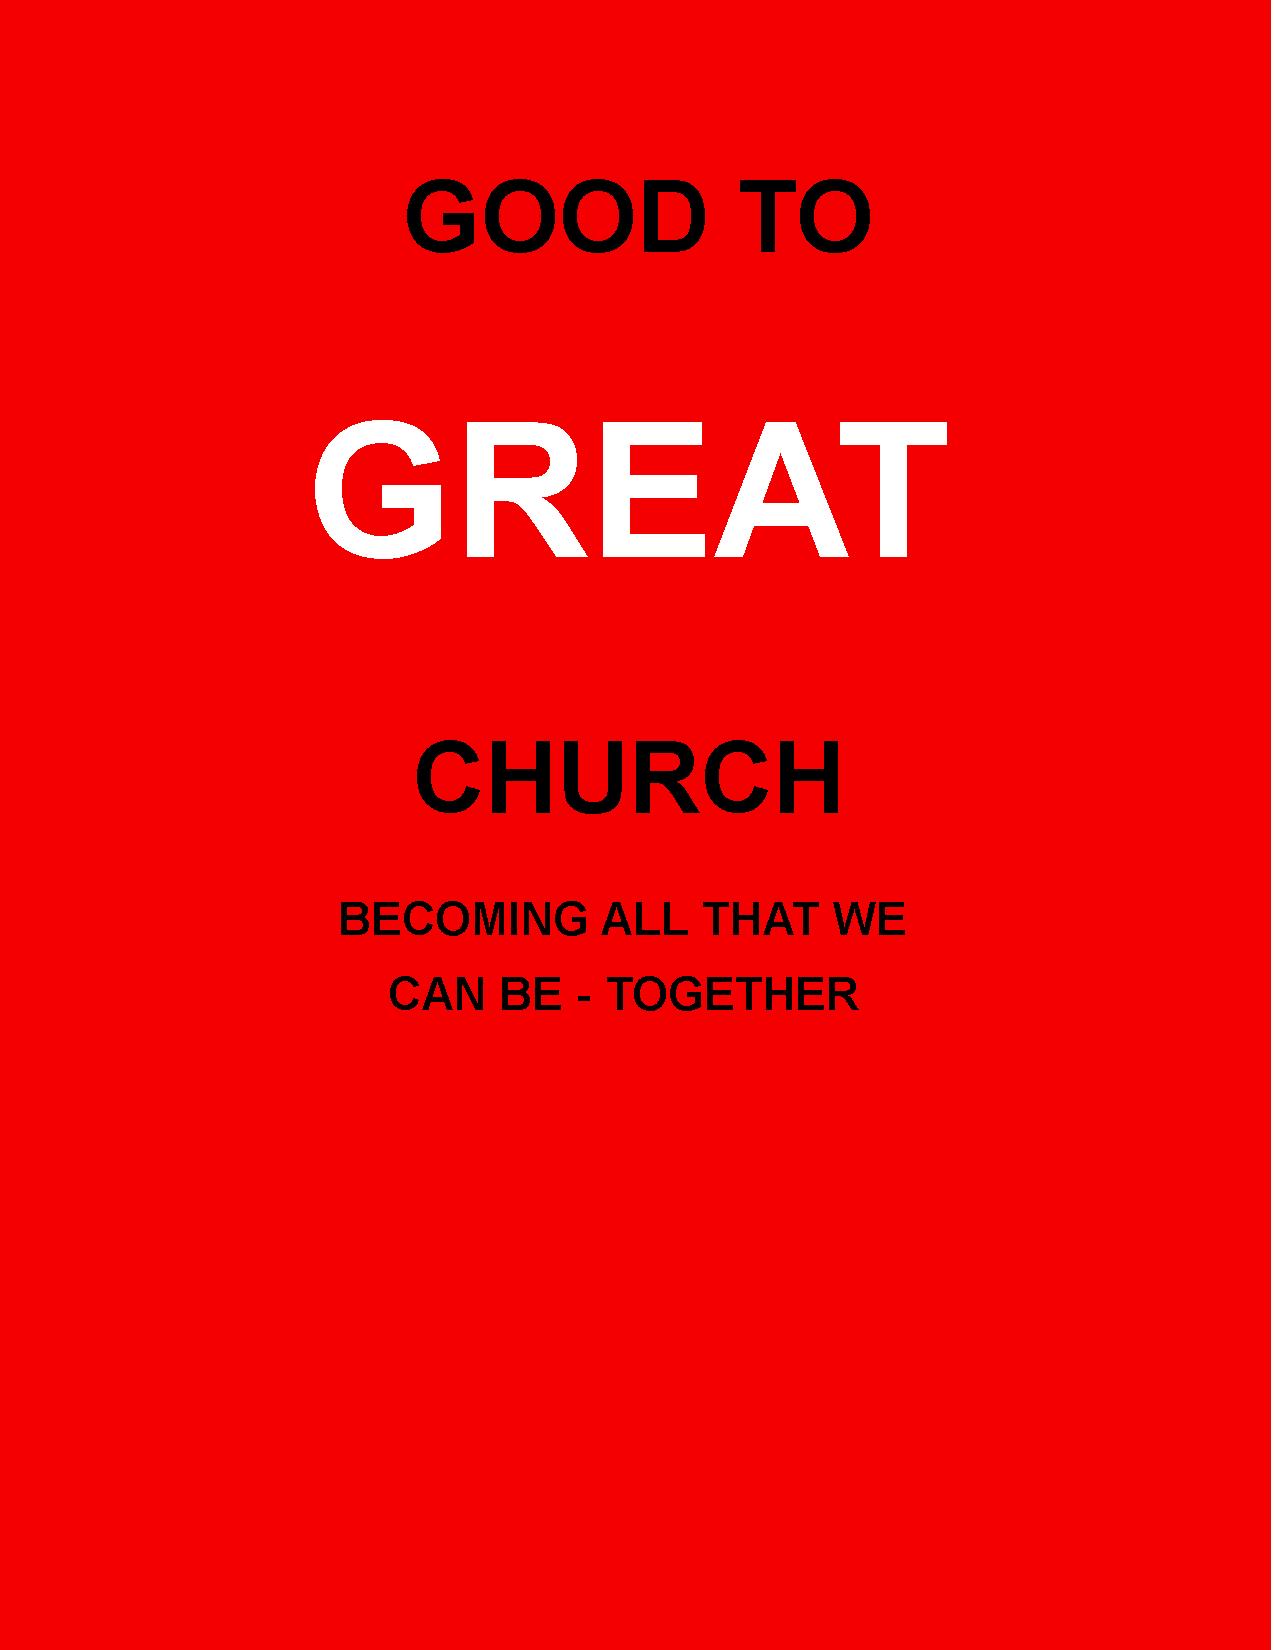 Becoming a Church of Great Love